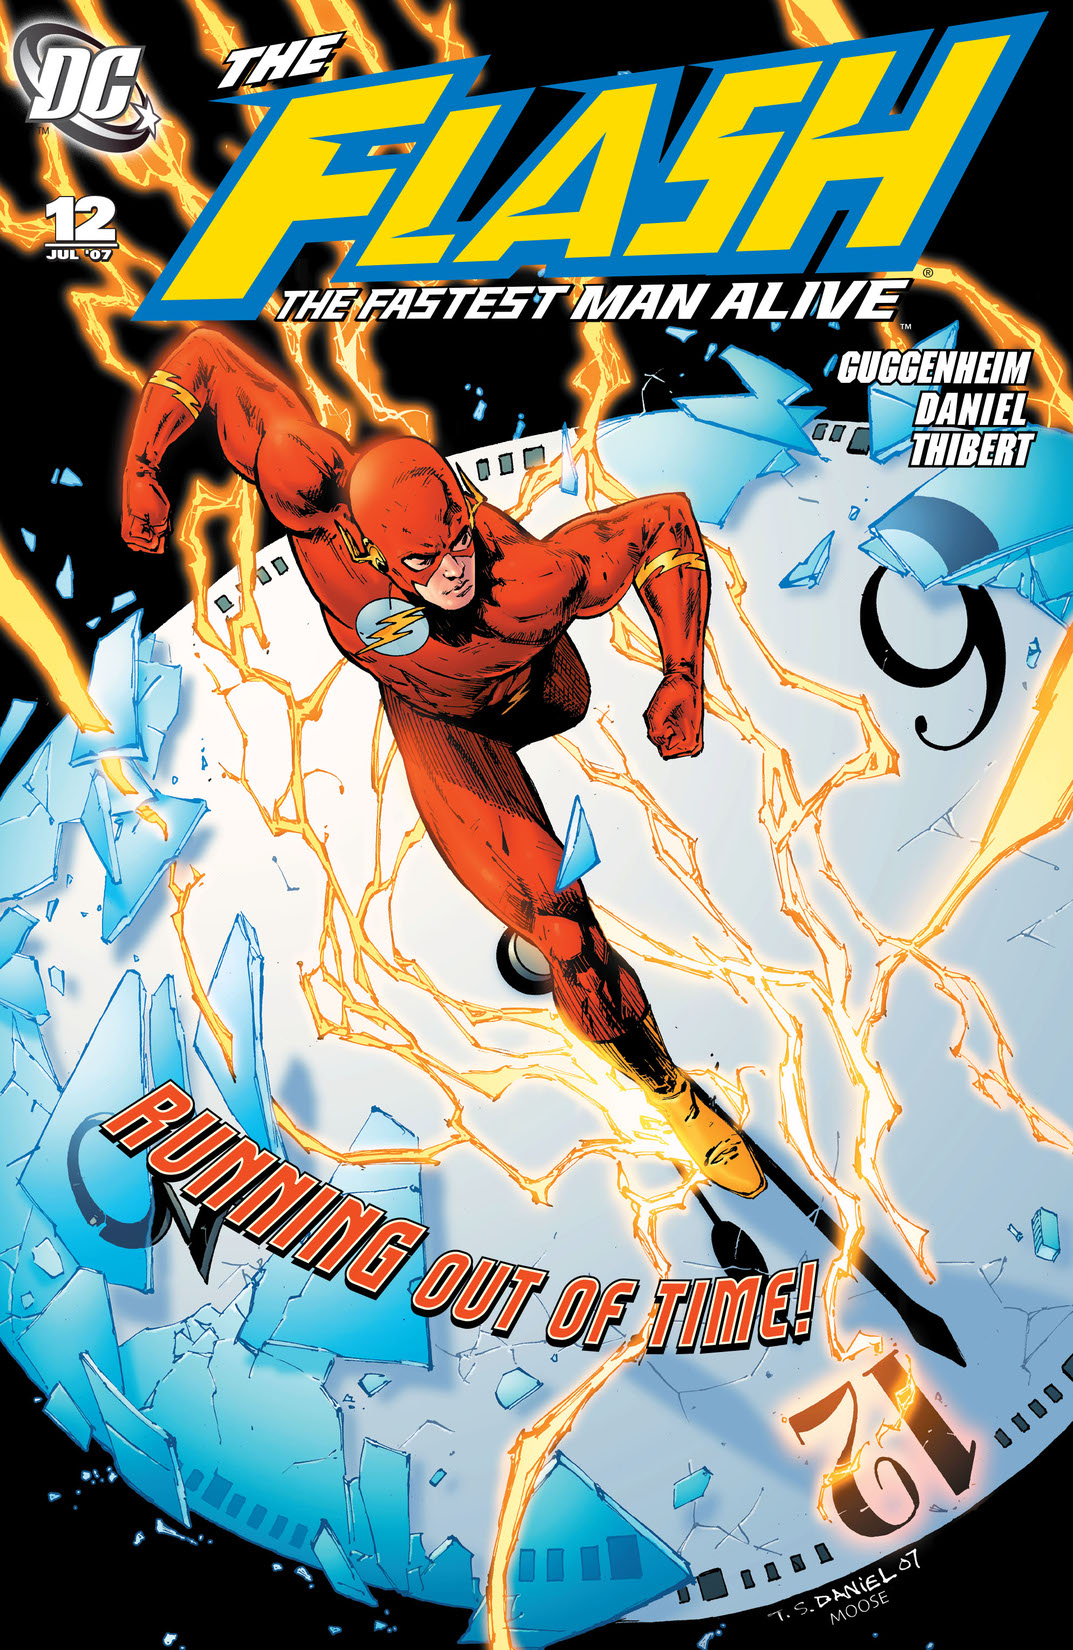 Flash: The Fastest Man Alive #12 preview images